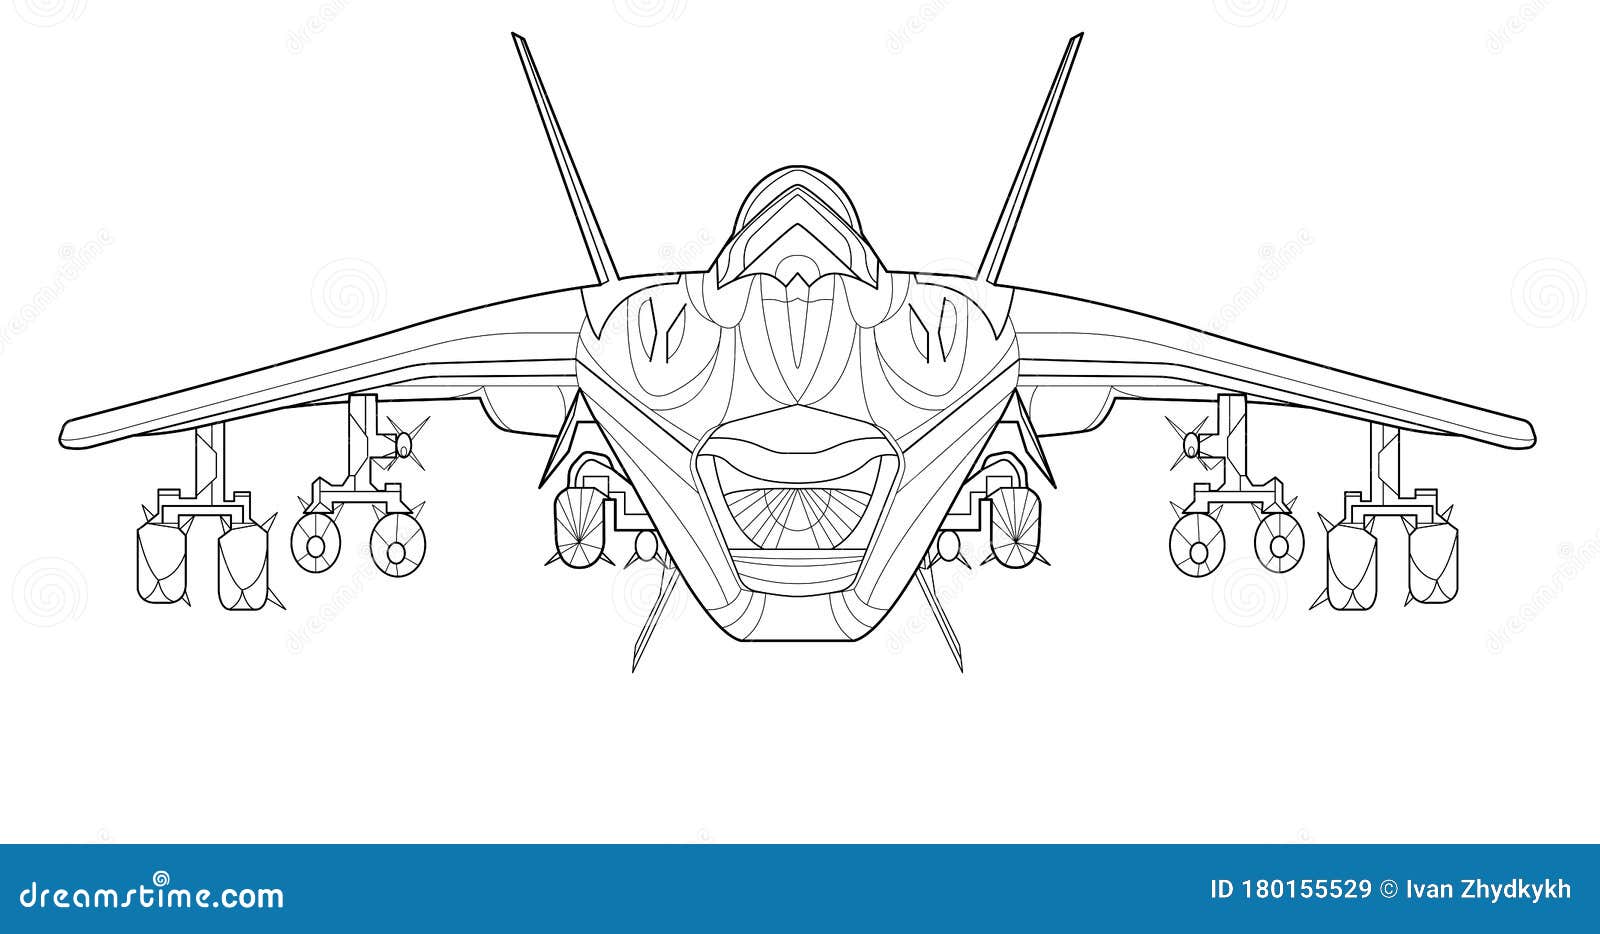 √ Jet Coloring Pages / Airplane Coloring Pages - Download jet coloring